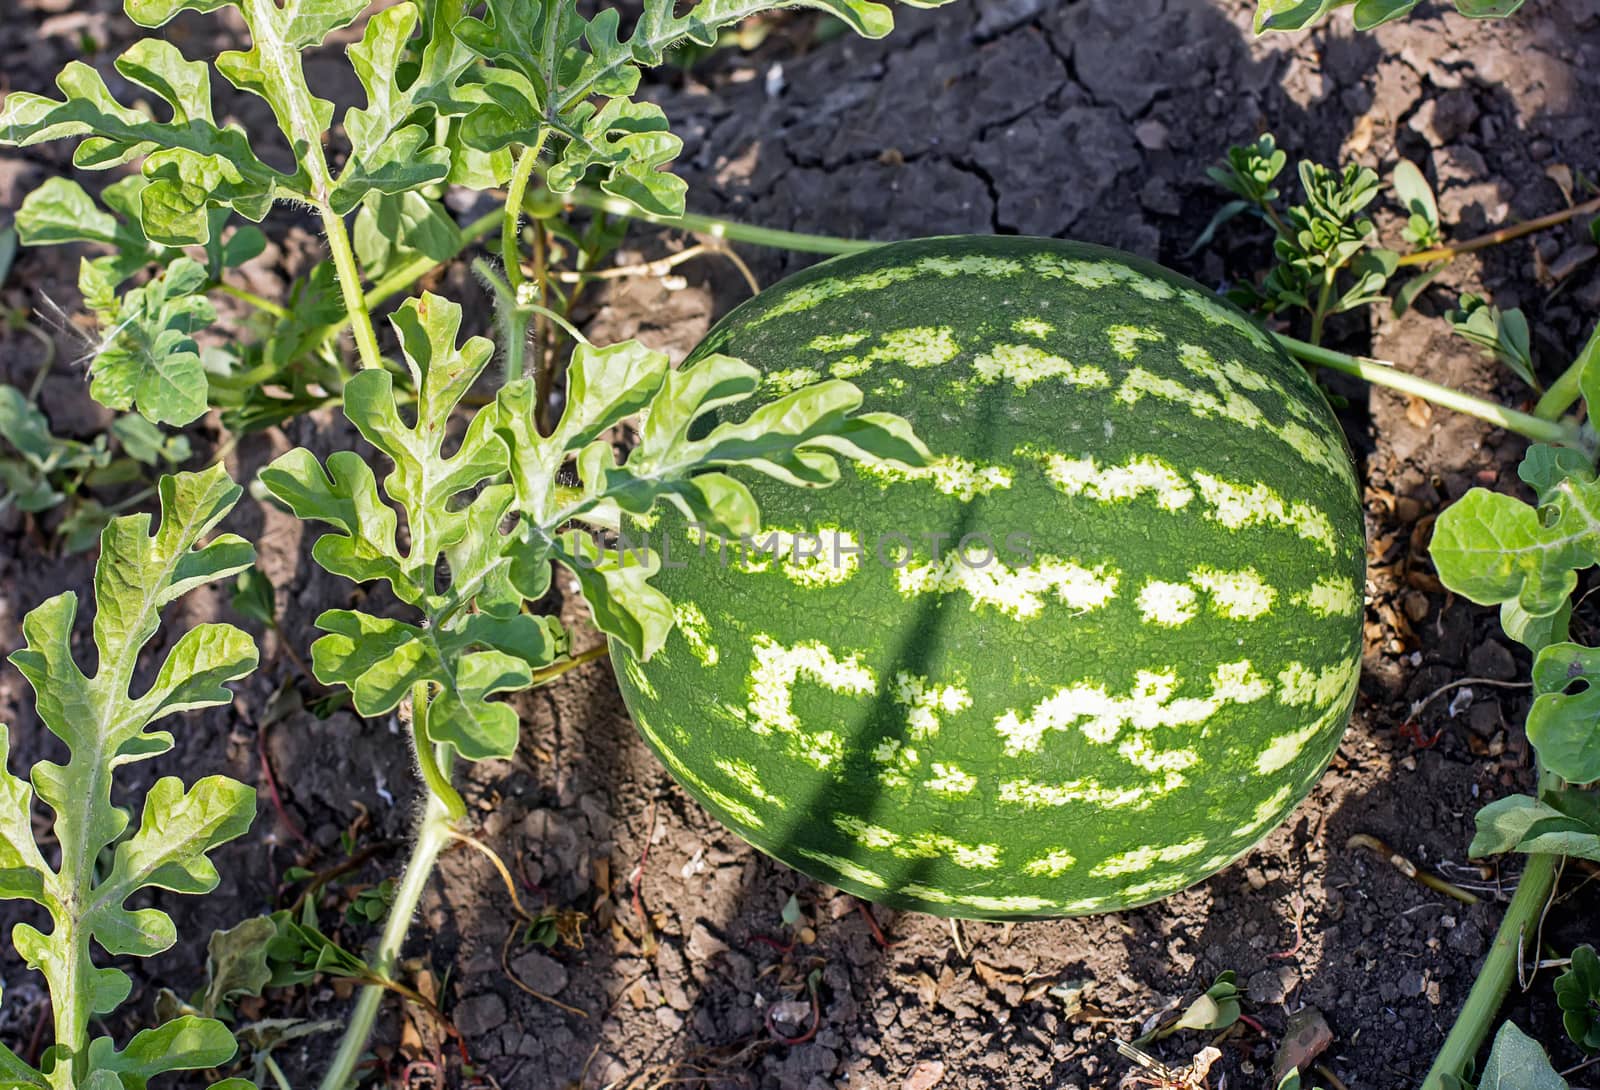 watermelon in the garden lying on the ground in the garden, summer and autumn vegetable crop, close-up